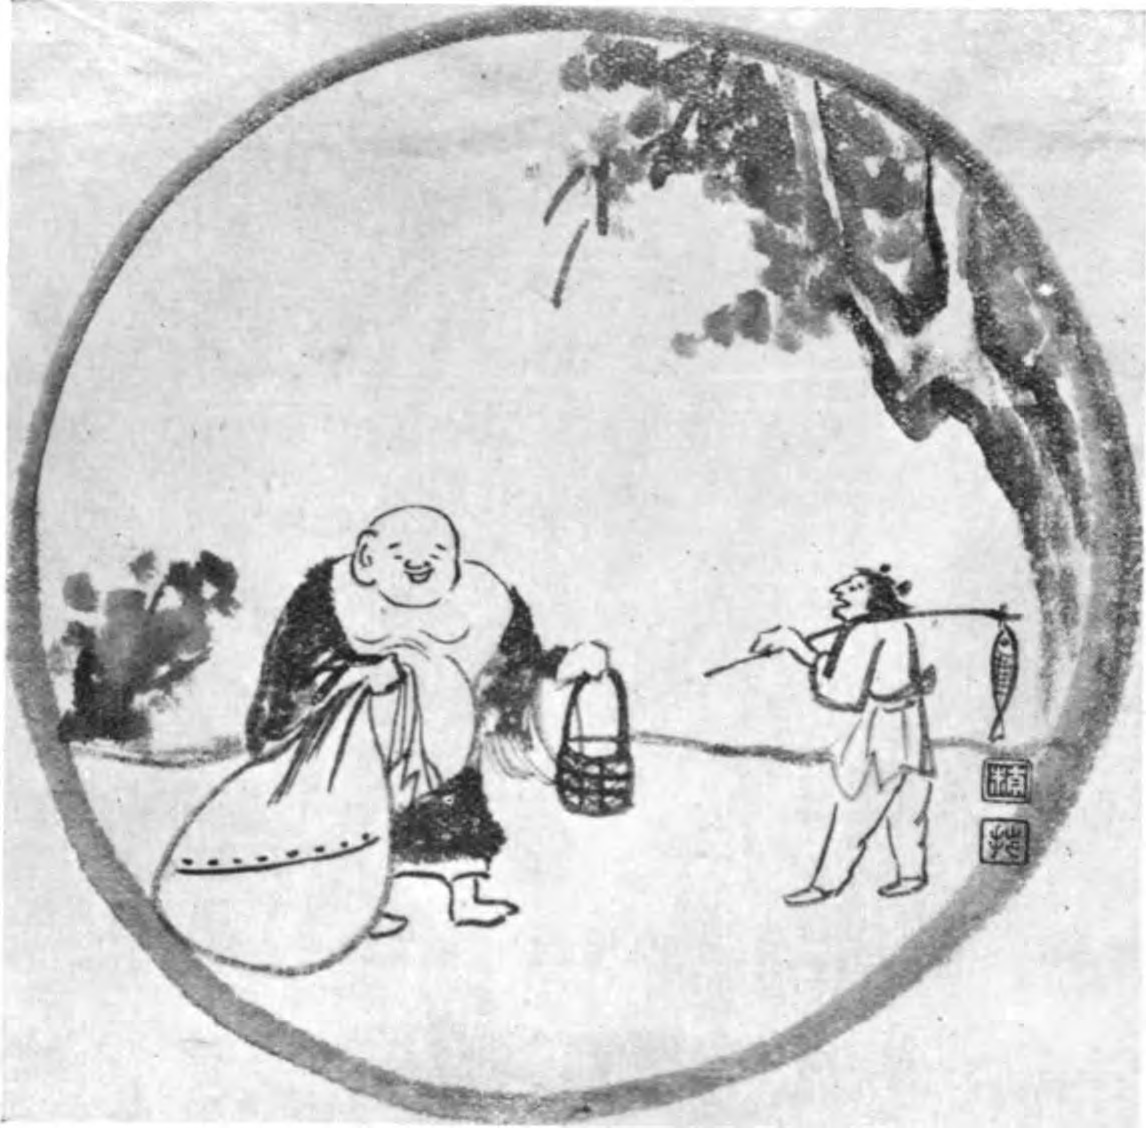 Drawing of a monk carrying a sack and basket passing by   a fisherman